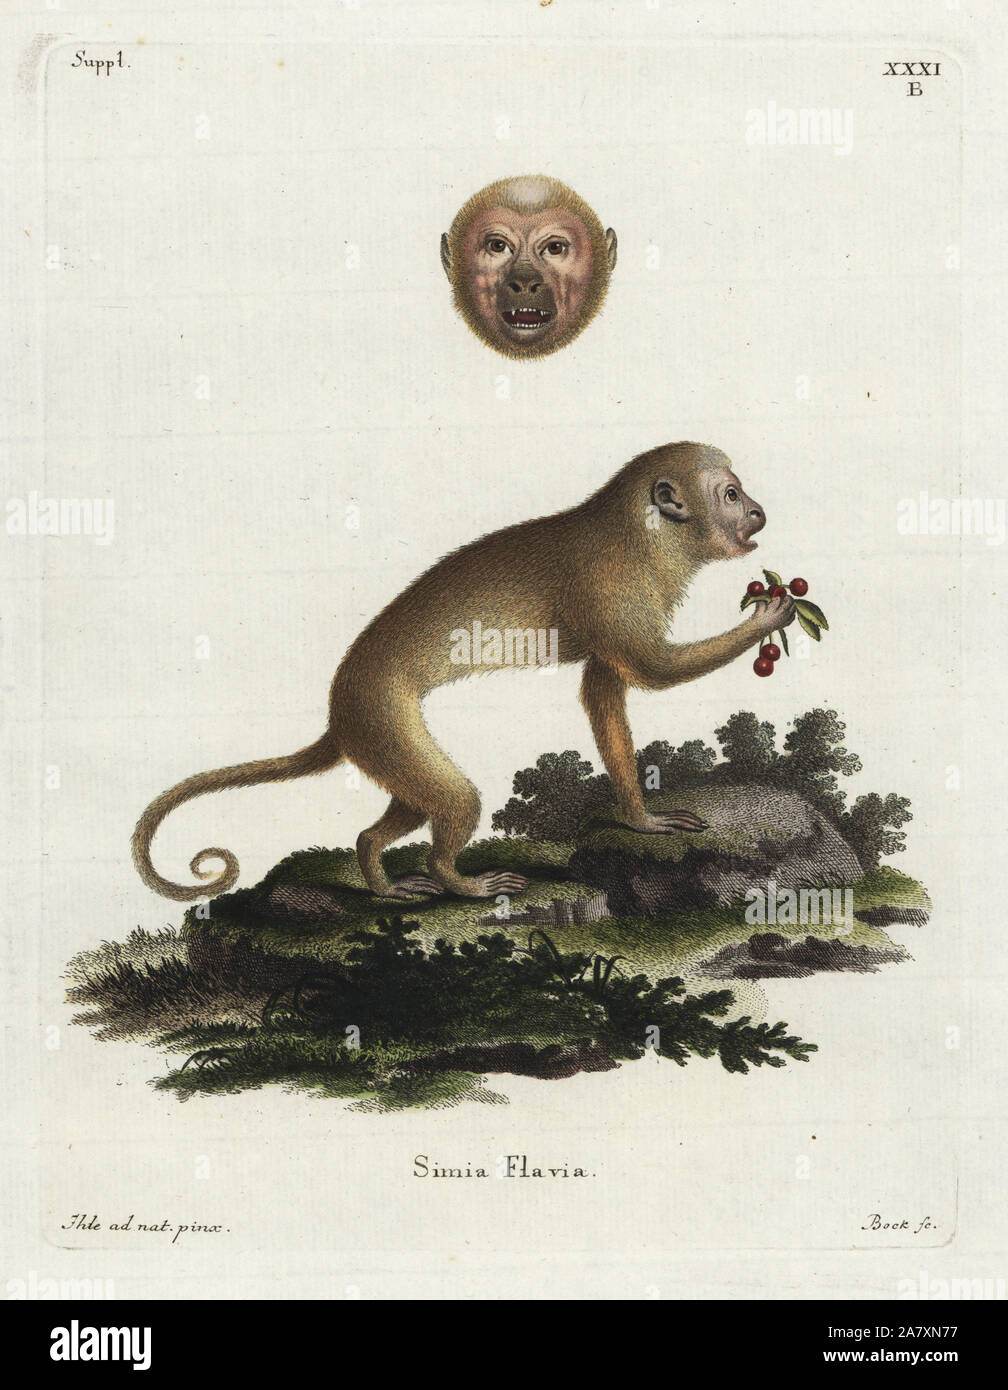 Blond capuchin, Sapajus flavius. Critically endangered. (Simia flavia.) Drawn from nature by Johan Eberhard Ihle, engraved by Bock. Handcoloured copperplate engraving from Johann Christian Daniel Schreber's Animal Illustrations after Nature, or Schreber's Fantastic Animals, Erlangen, Germany, 1775. Stock Photo